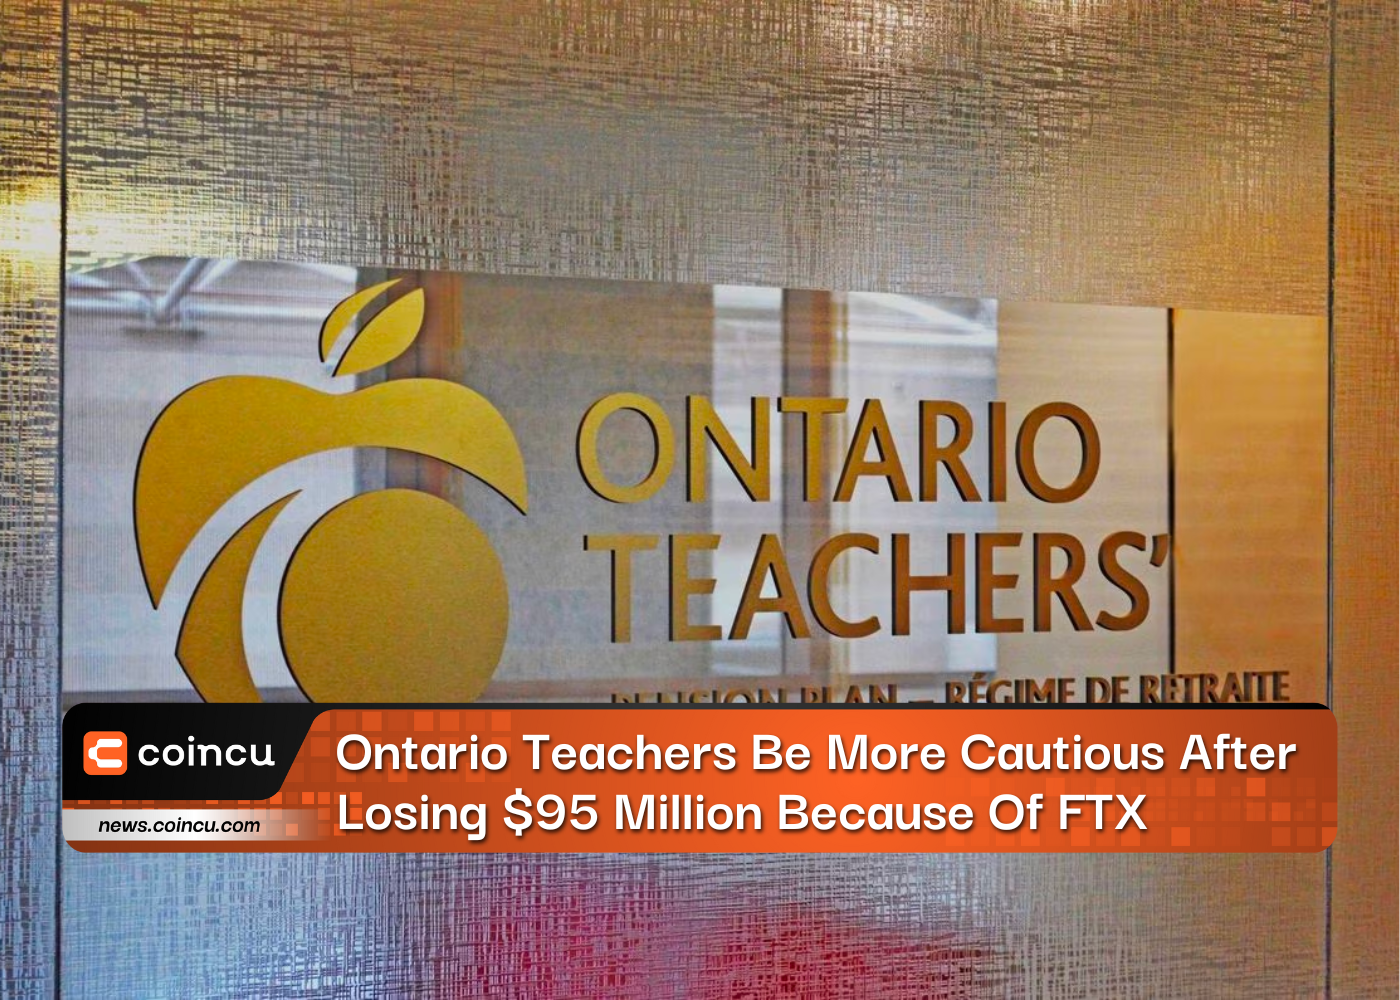 Ontario Teachers Be More Cautious After Losing $95 Million Because Of FTX